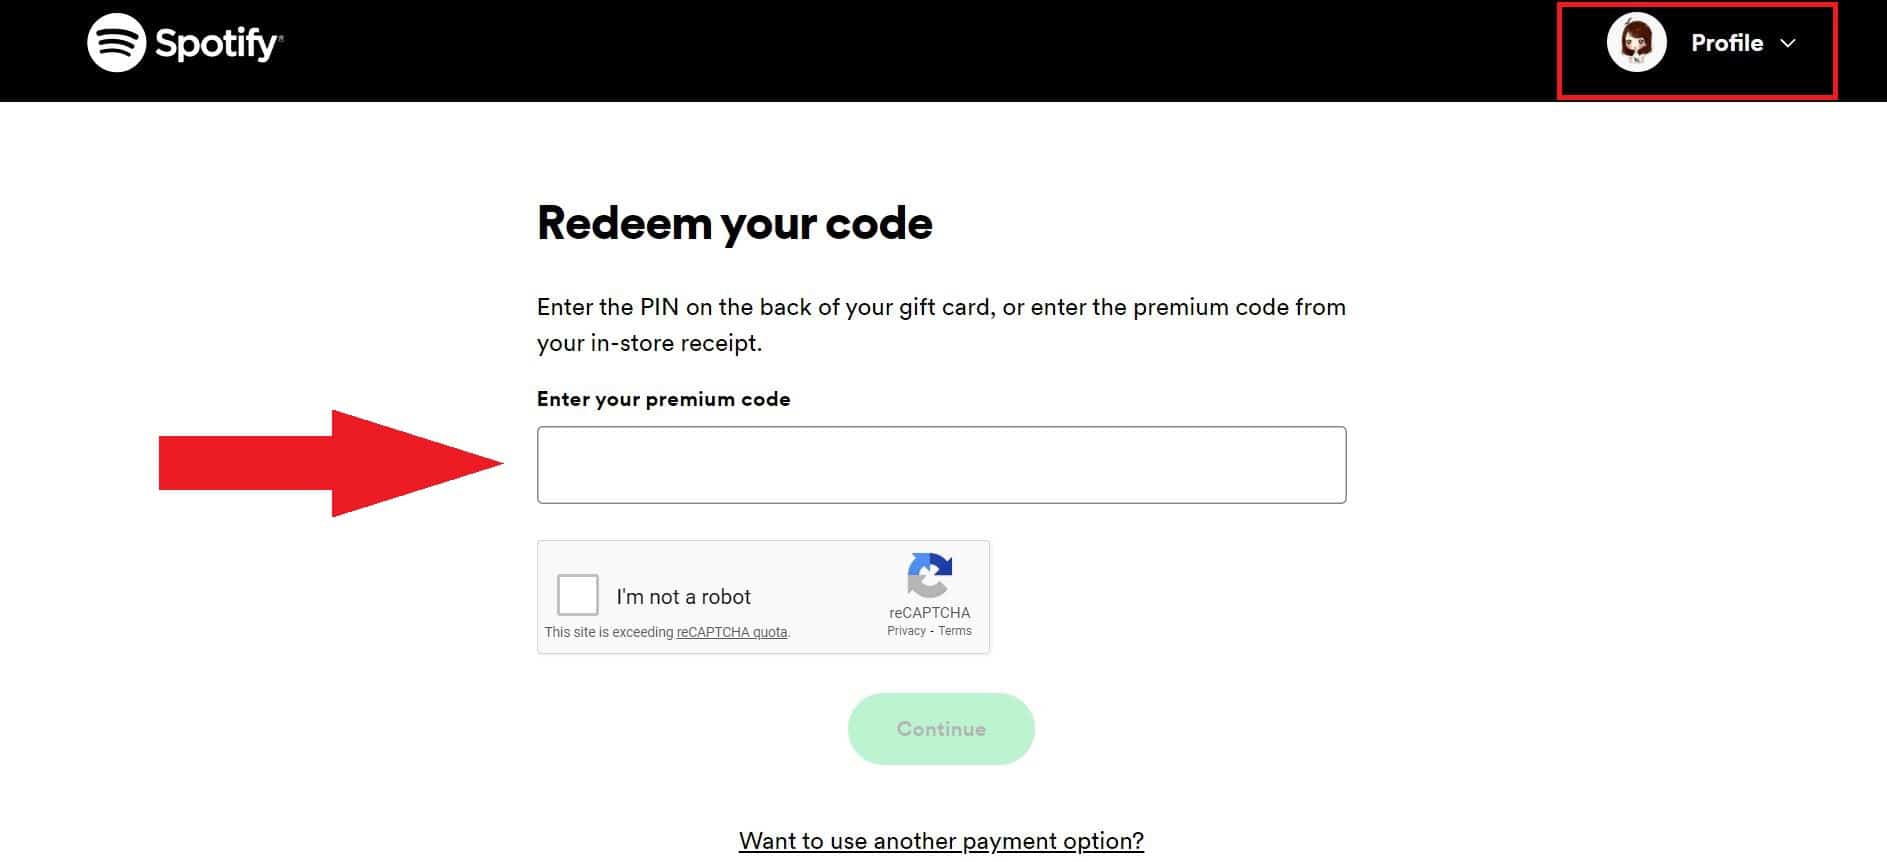 How to use a Spotify gift card to get a Spotify Premium subscription